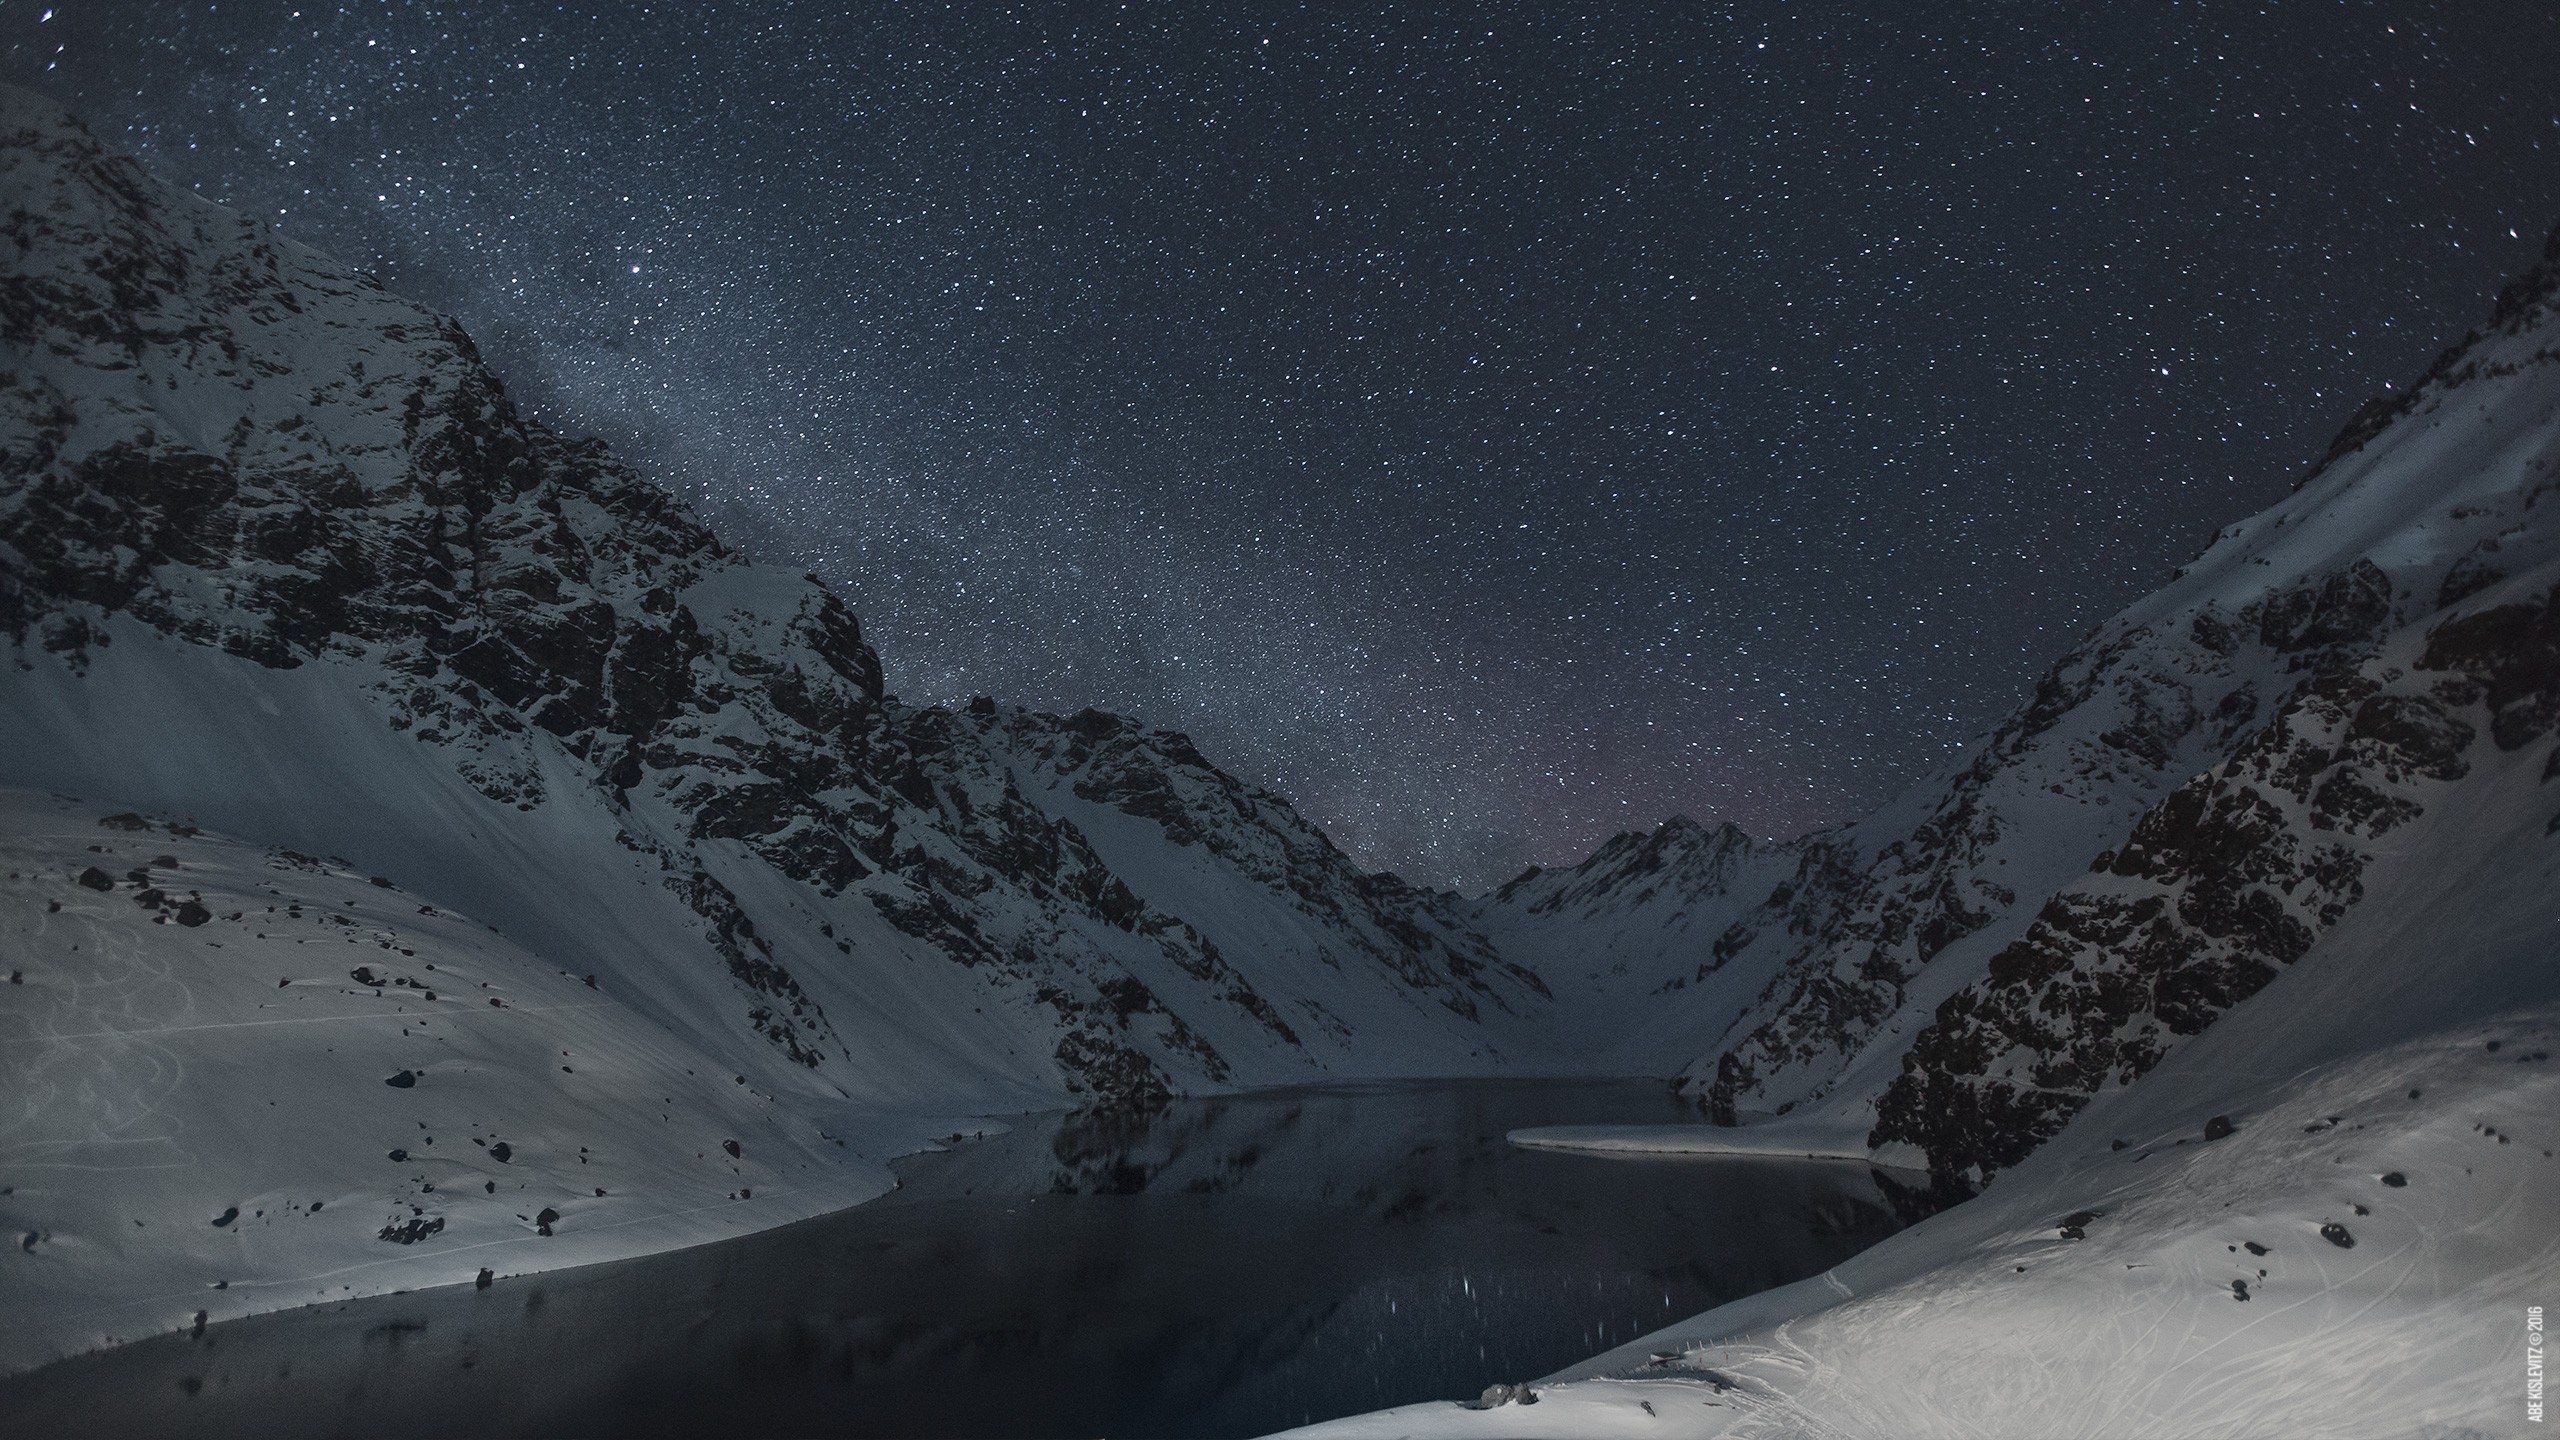 General 2560x1440 snow lake nature mountains winter stars low light